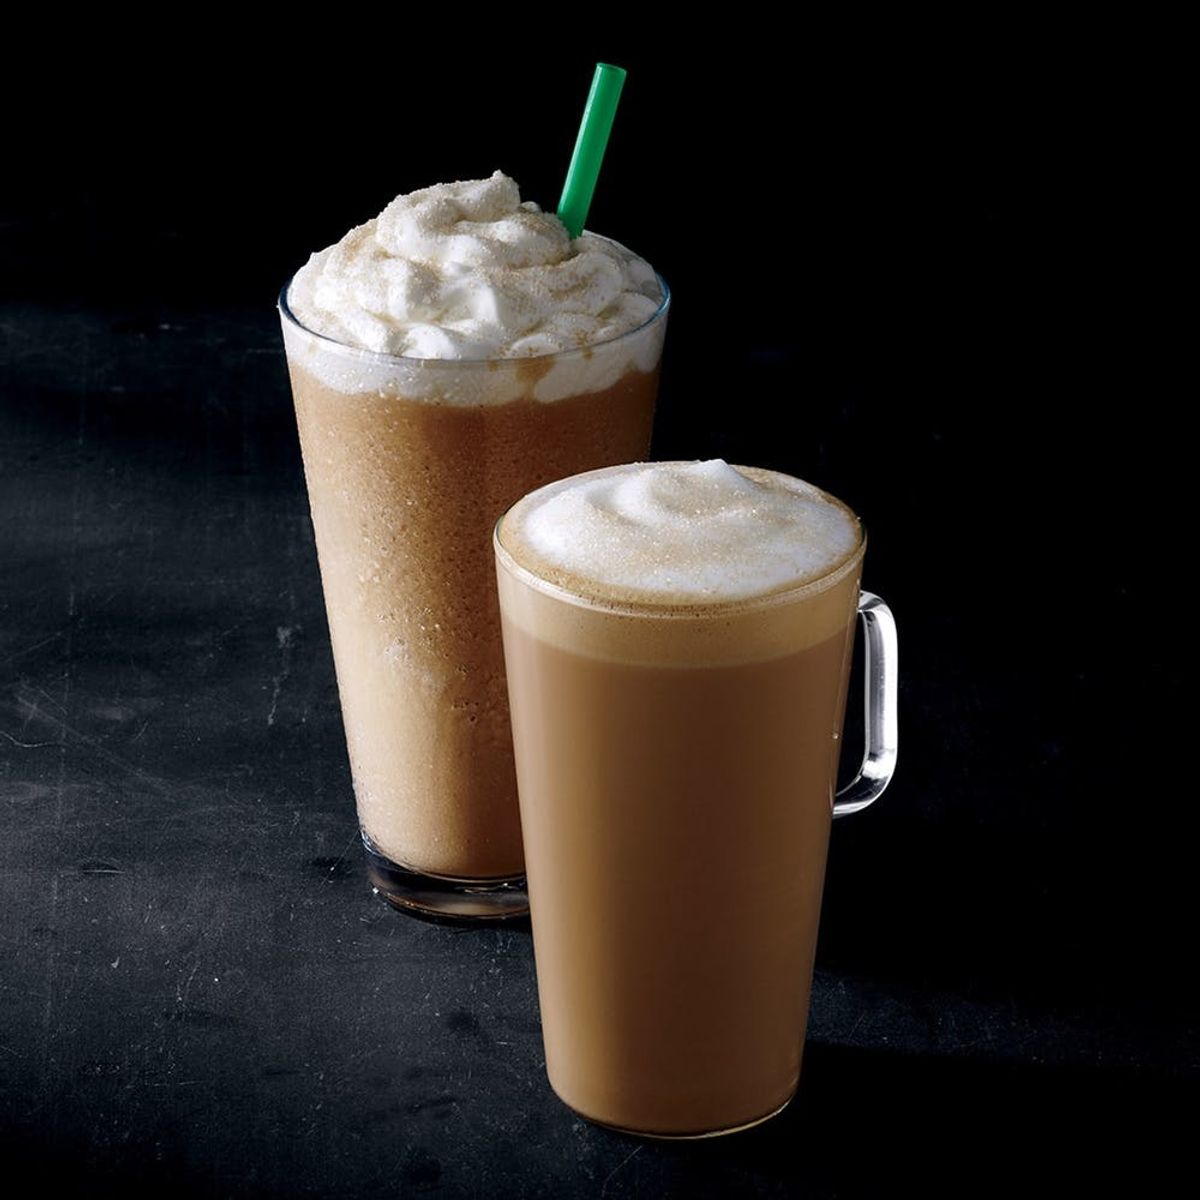 Starbucks Has ANOTHER New Drink Harry Potter Fans Will Approve Of